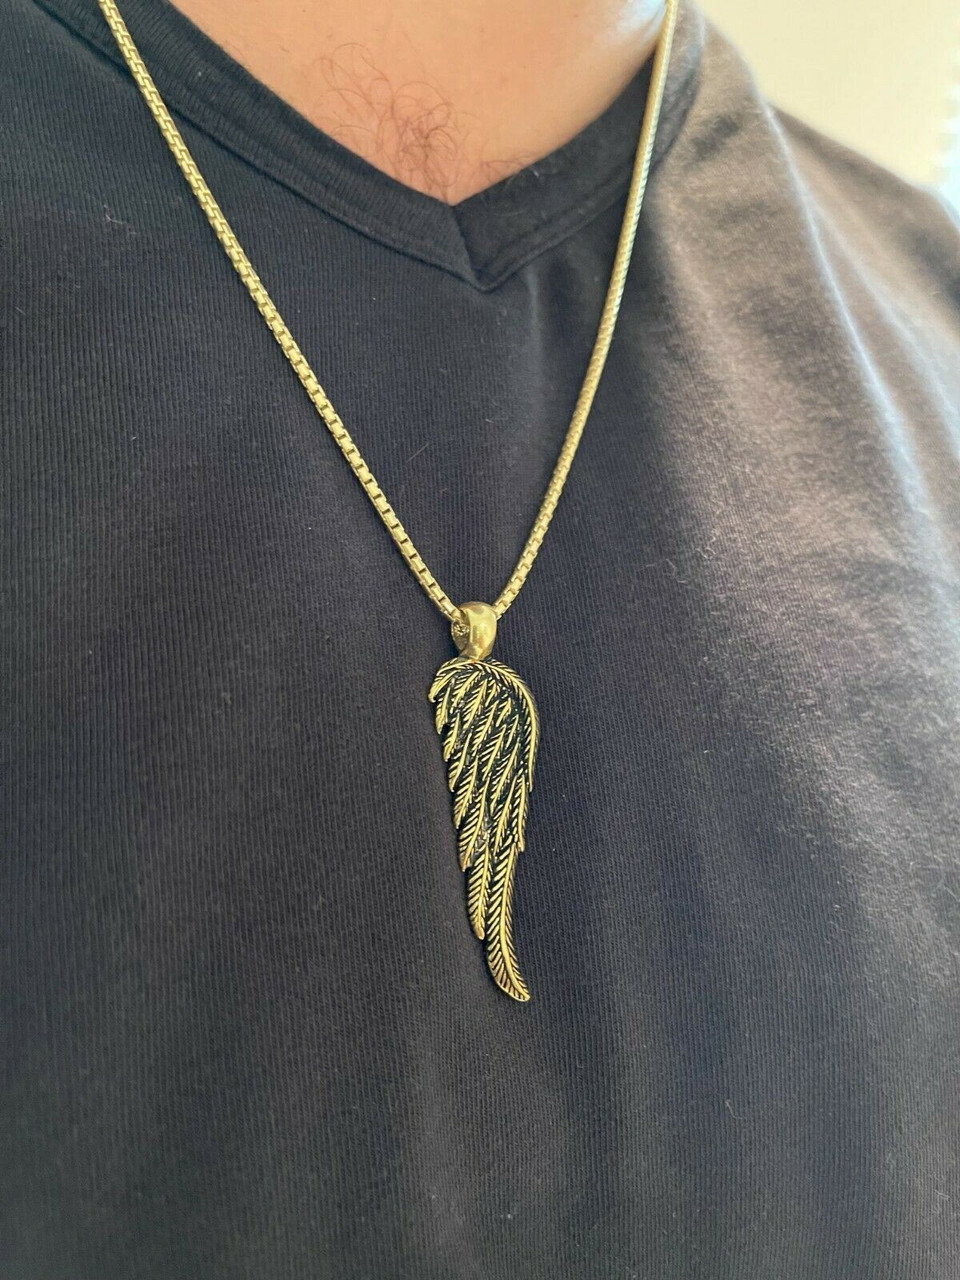 Buy Feather Necklace for Men, Groomsmen Gift, Men's Necklace With a Silver Feather  Pendant, Silver Chain, Gift for Him, Minimalist Necklace Online in India -  Etsy